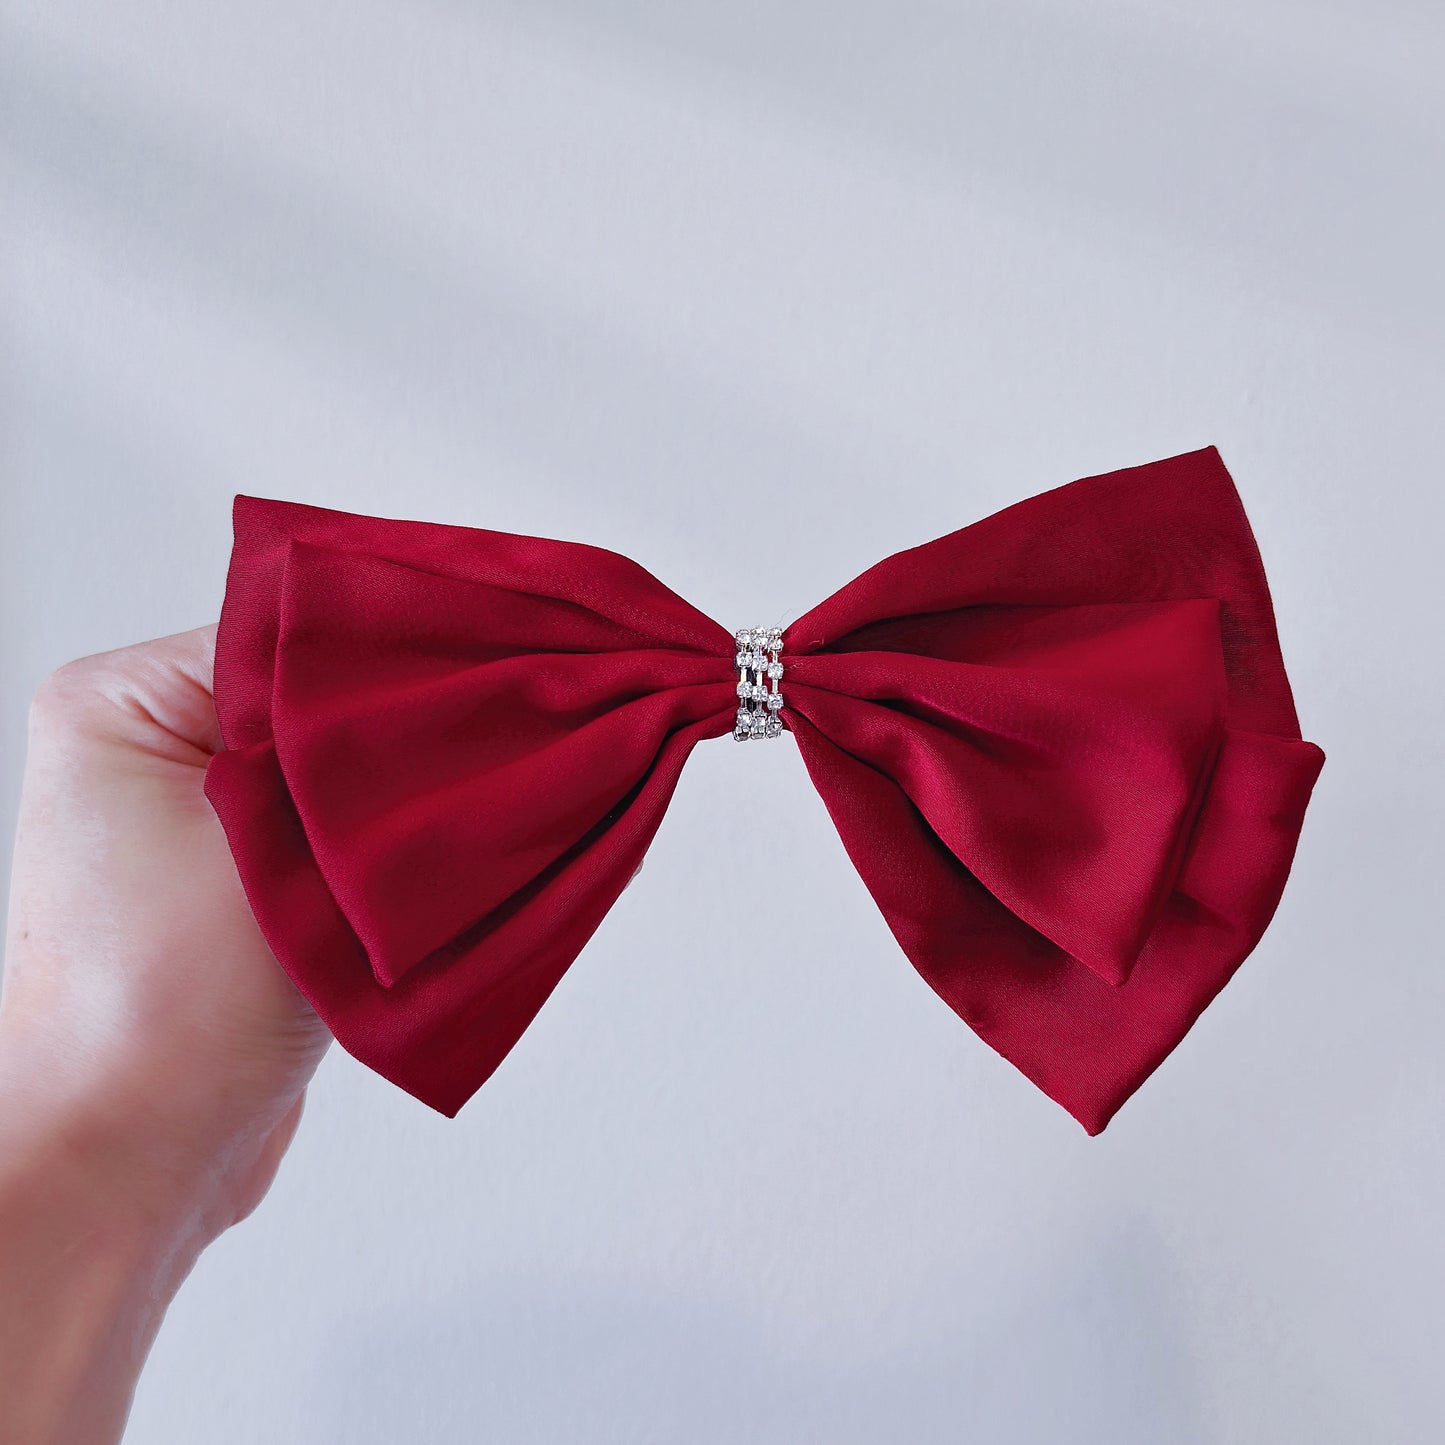 Elegant Satin Ribbon Bow Hair Accessory with Rhinestone Detail – Versatile and Chic